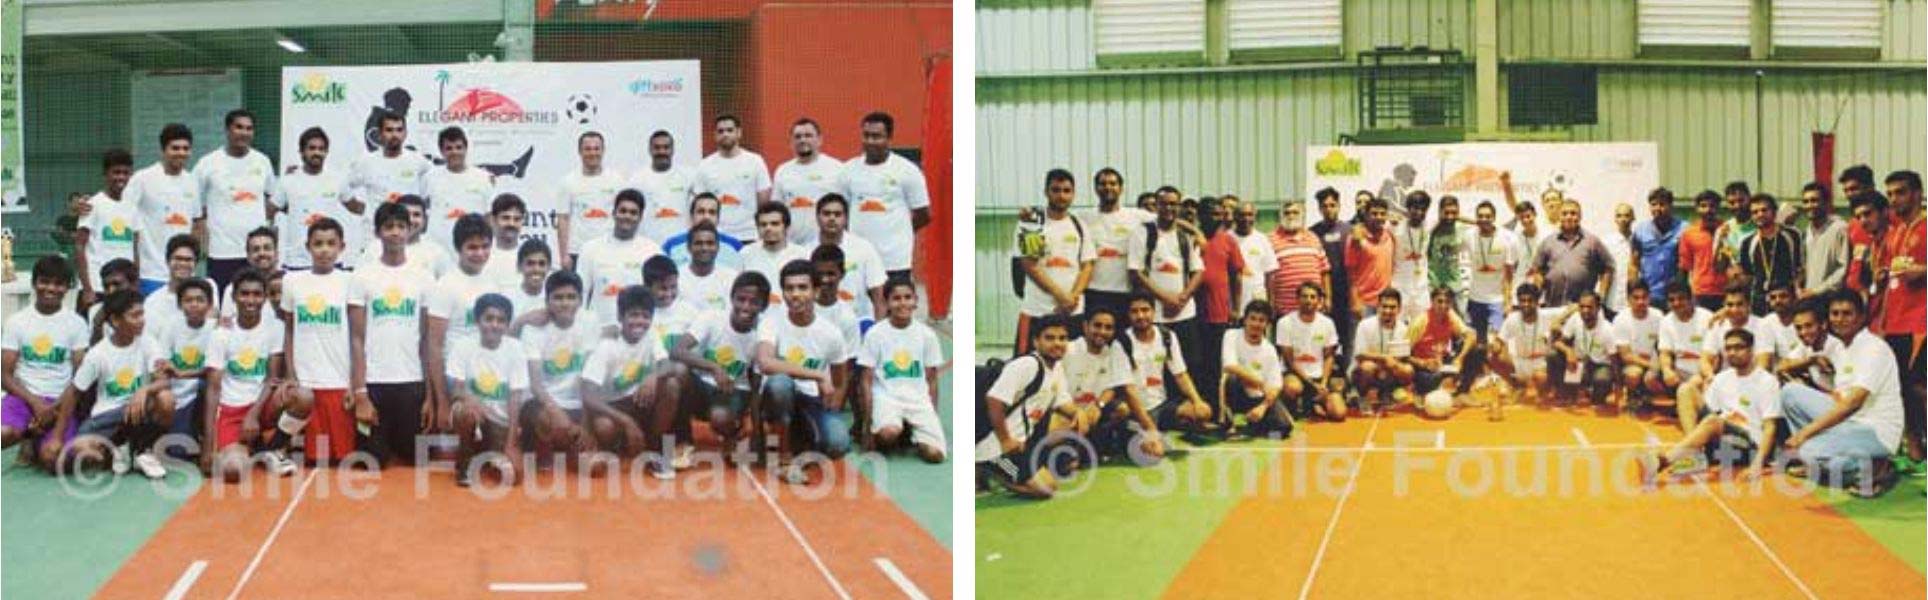 Charity Football Tournament in support of Mission Education